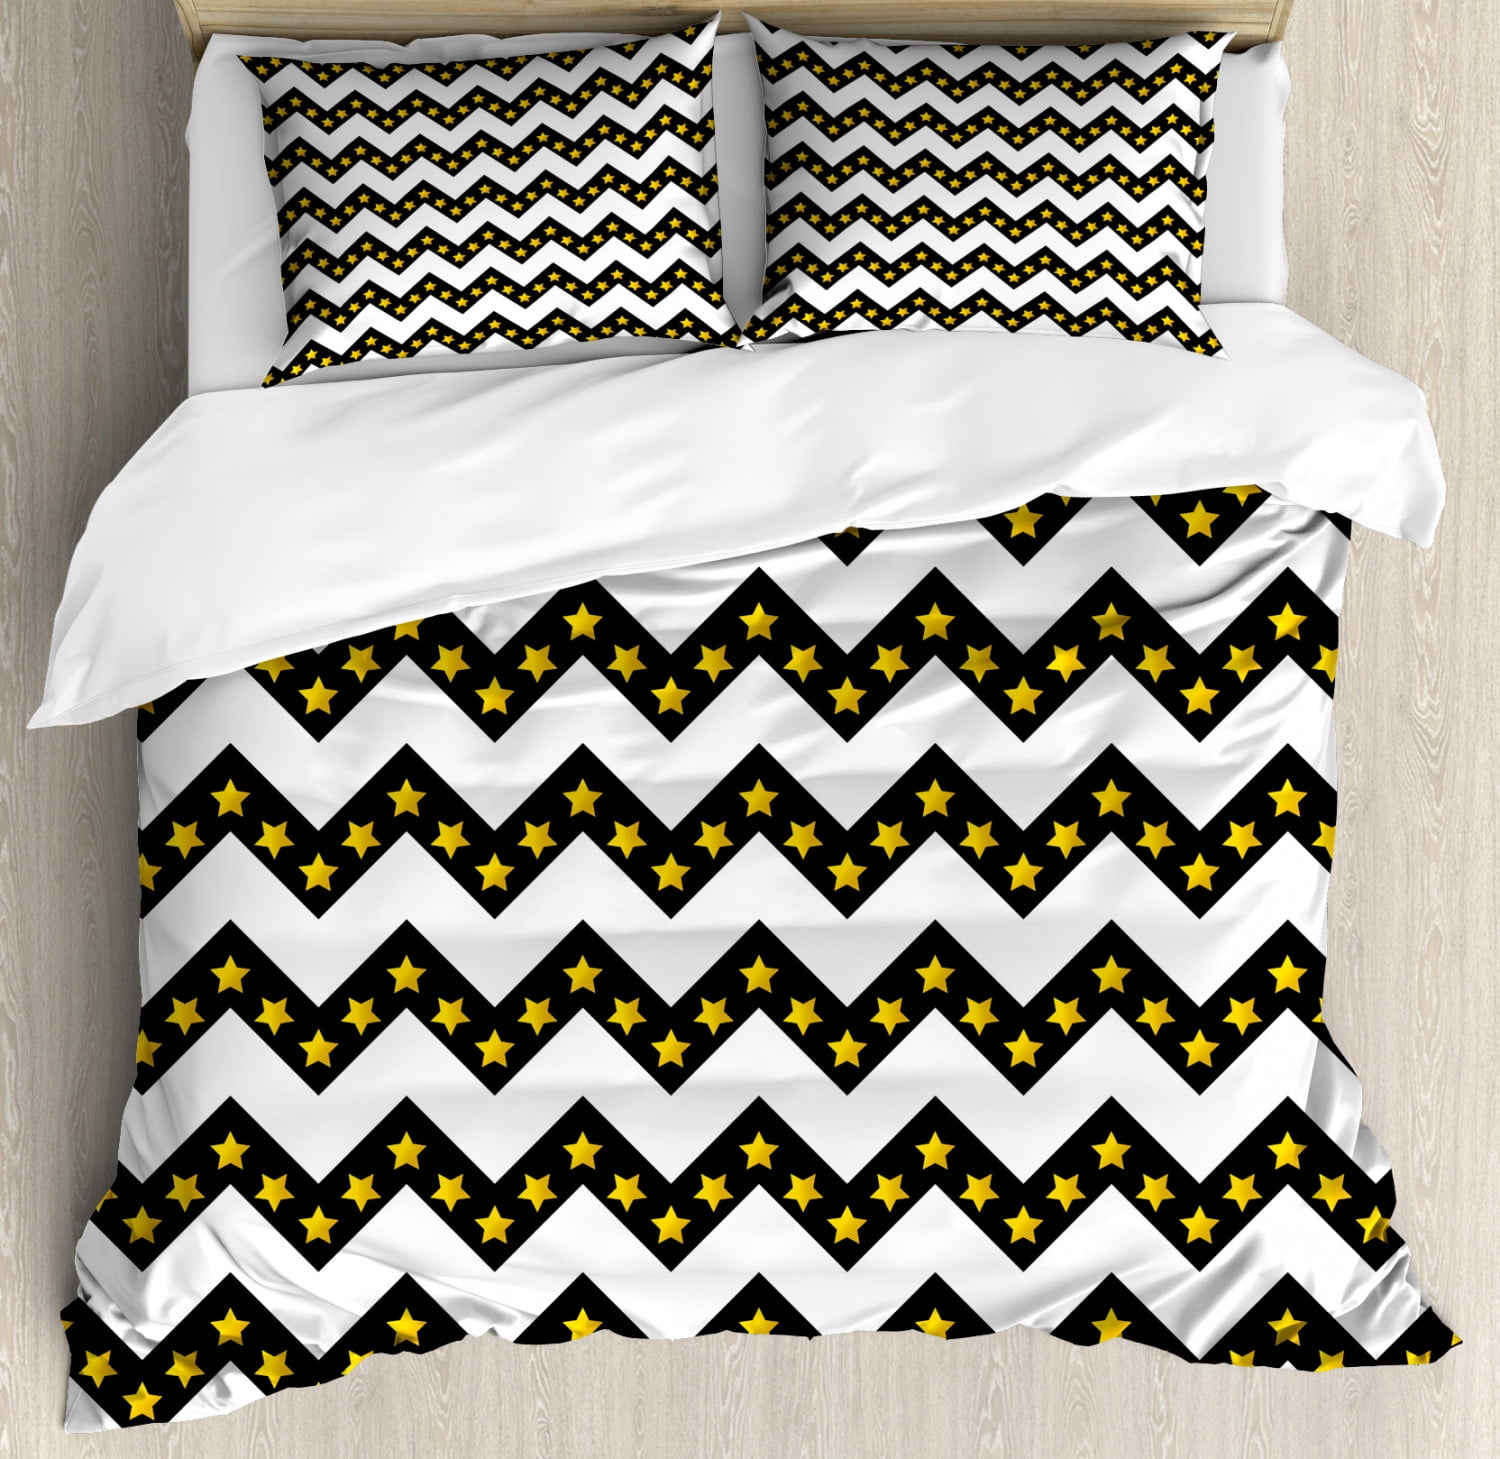 Striped Red and Yellow Zig Zag Duvet Cover and Pillowcase Bedding Set Bed Linen 